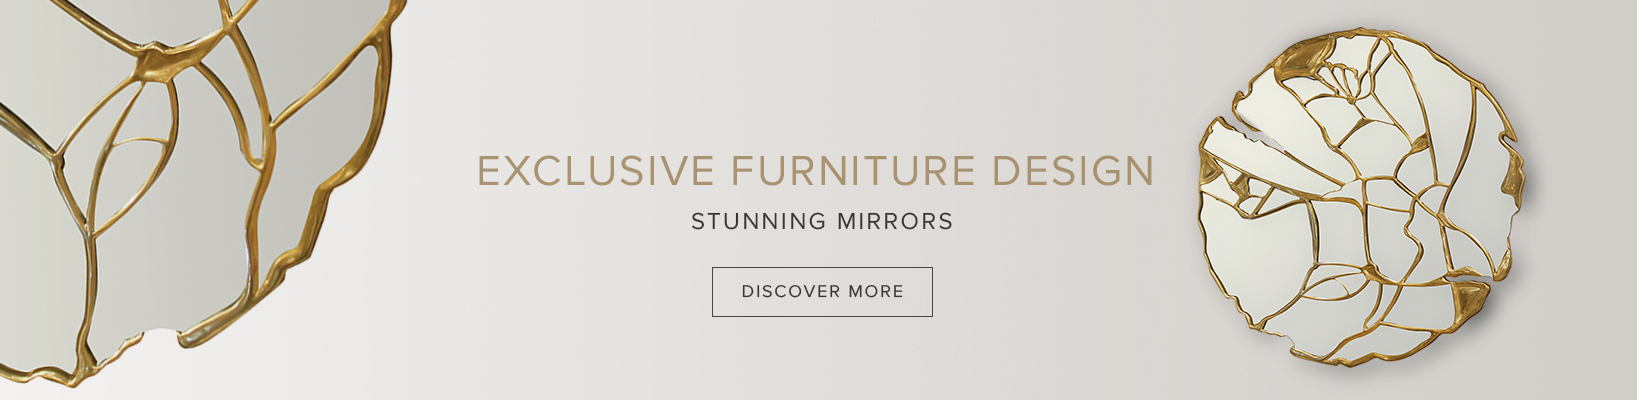 Exclusive Mirrors For Your Home Decor Maison et Objet Thank You to All of the Partners of Covet Group at Maison et Objet banners 20glance